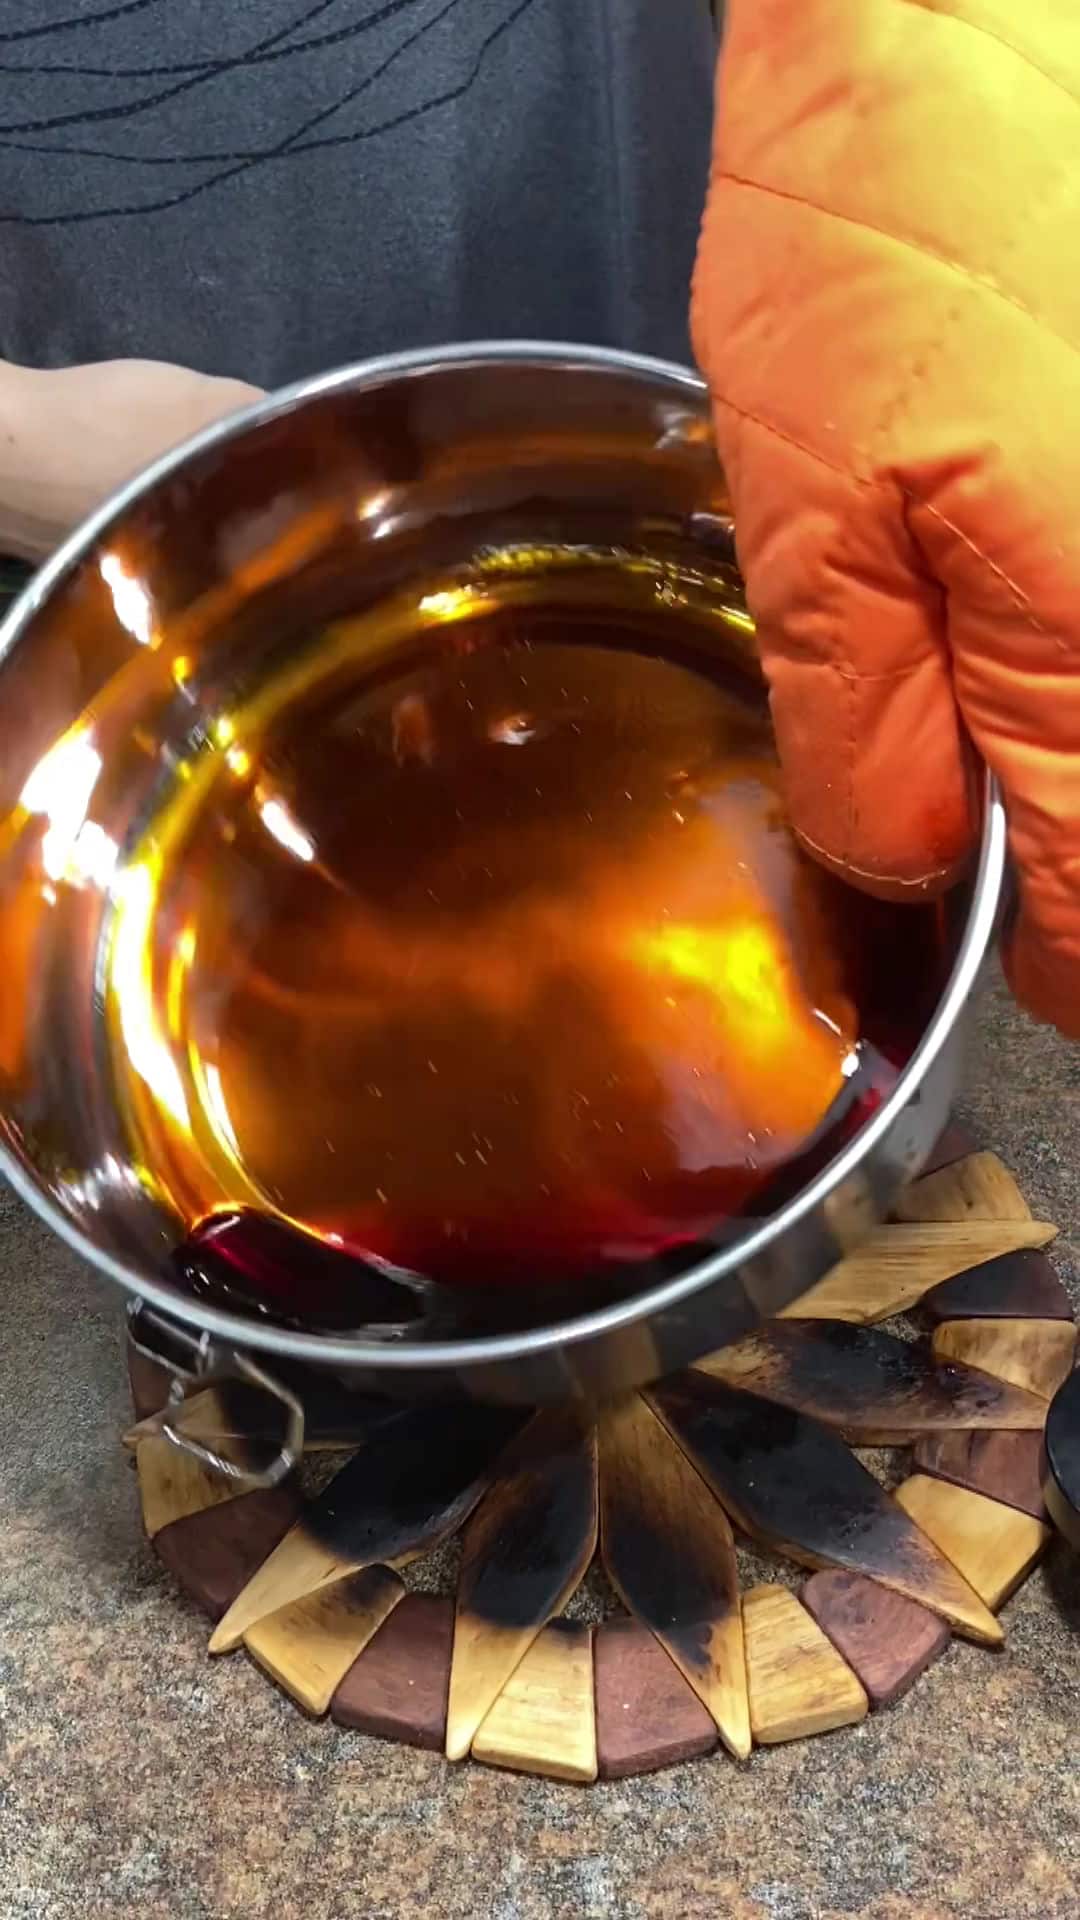 a demonstration of swirling the sugar syrup to coat the flanera pan.